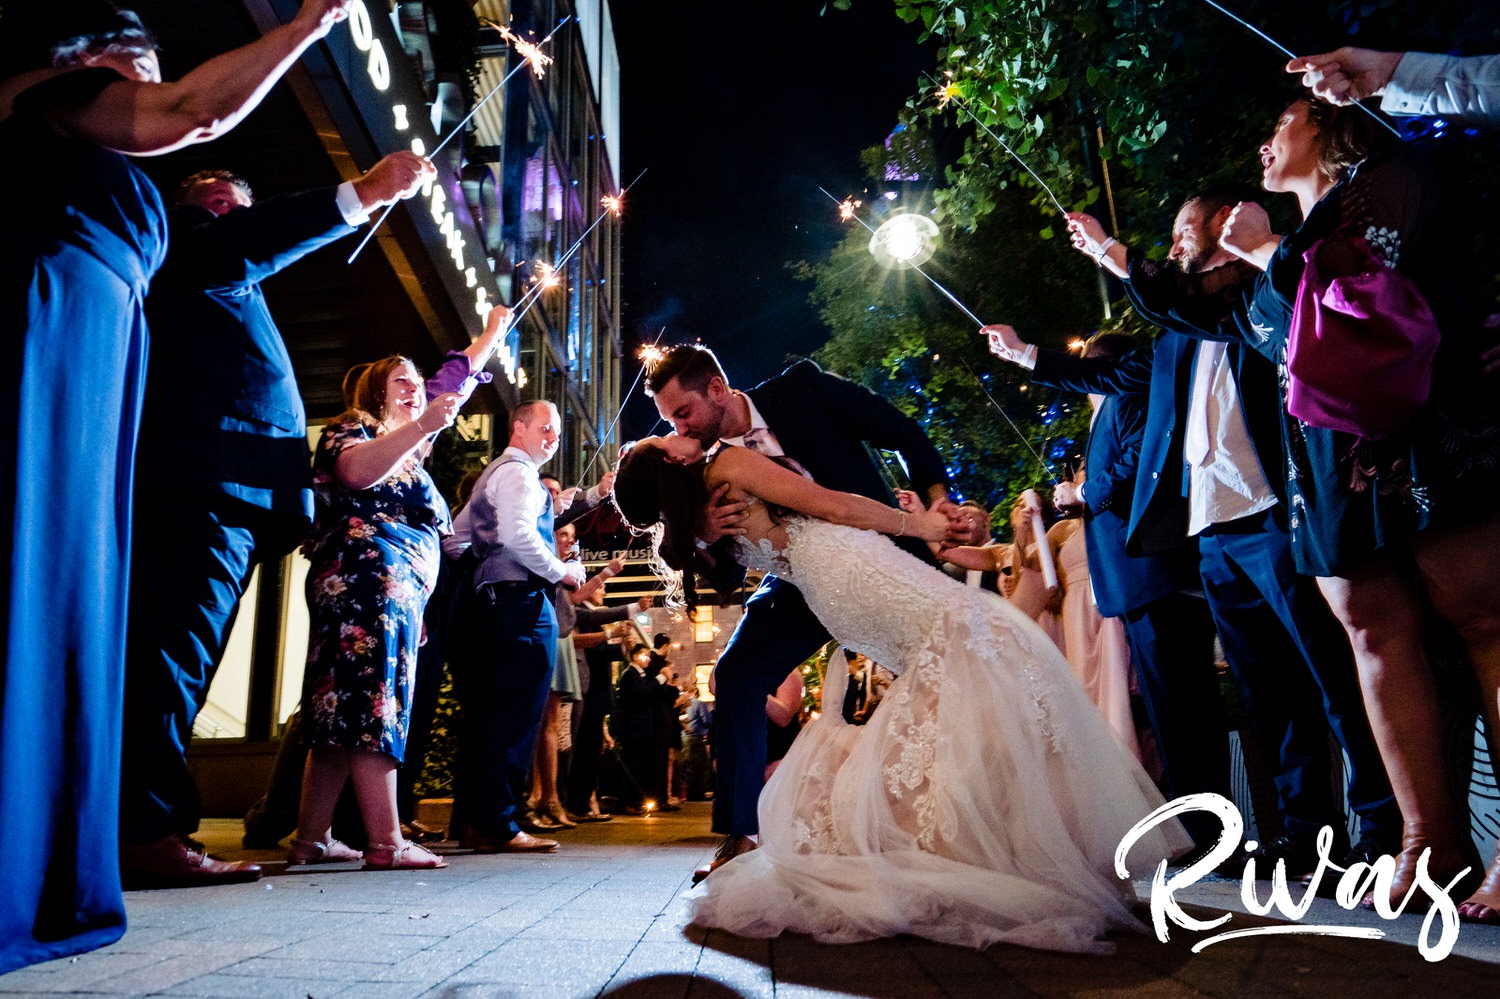 A candid picture of a bride and groom exiting their wedding reception at The Gallery Event Space under an arc of sparklers on the night of their wedding in downtown Kansas City. 